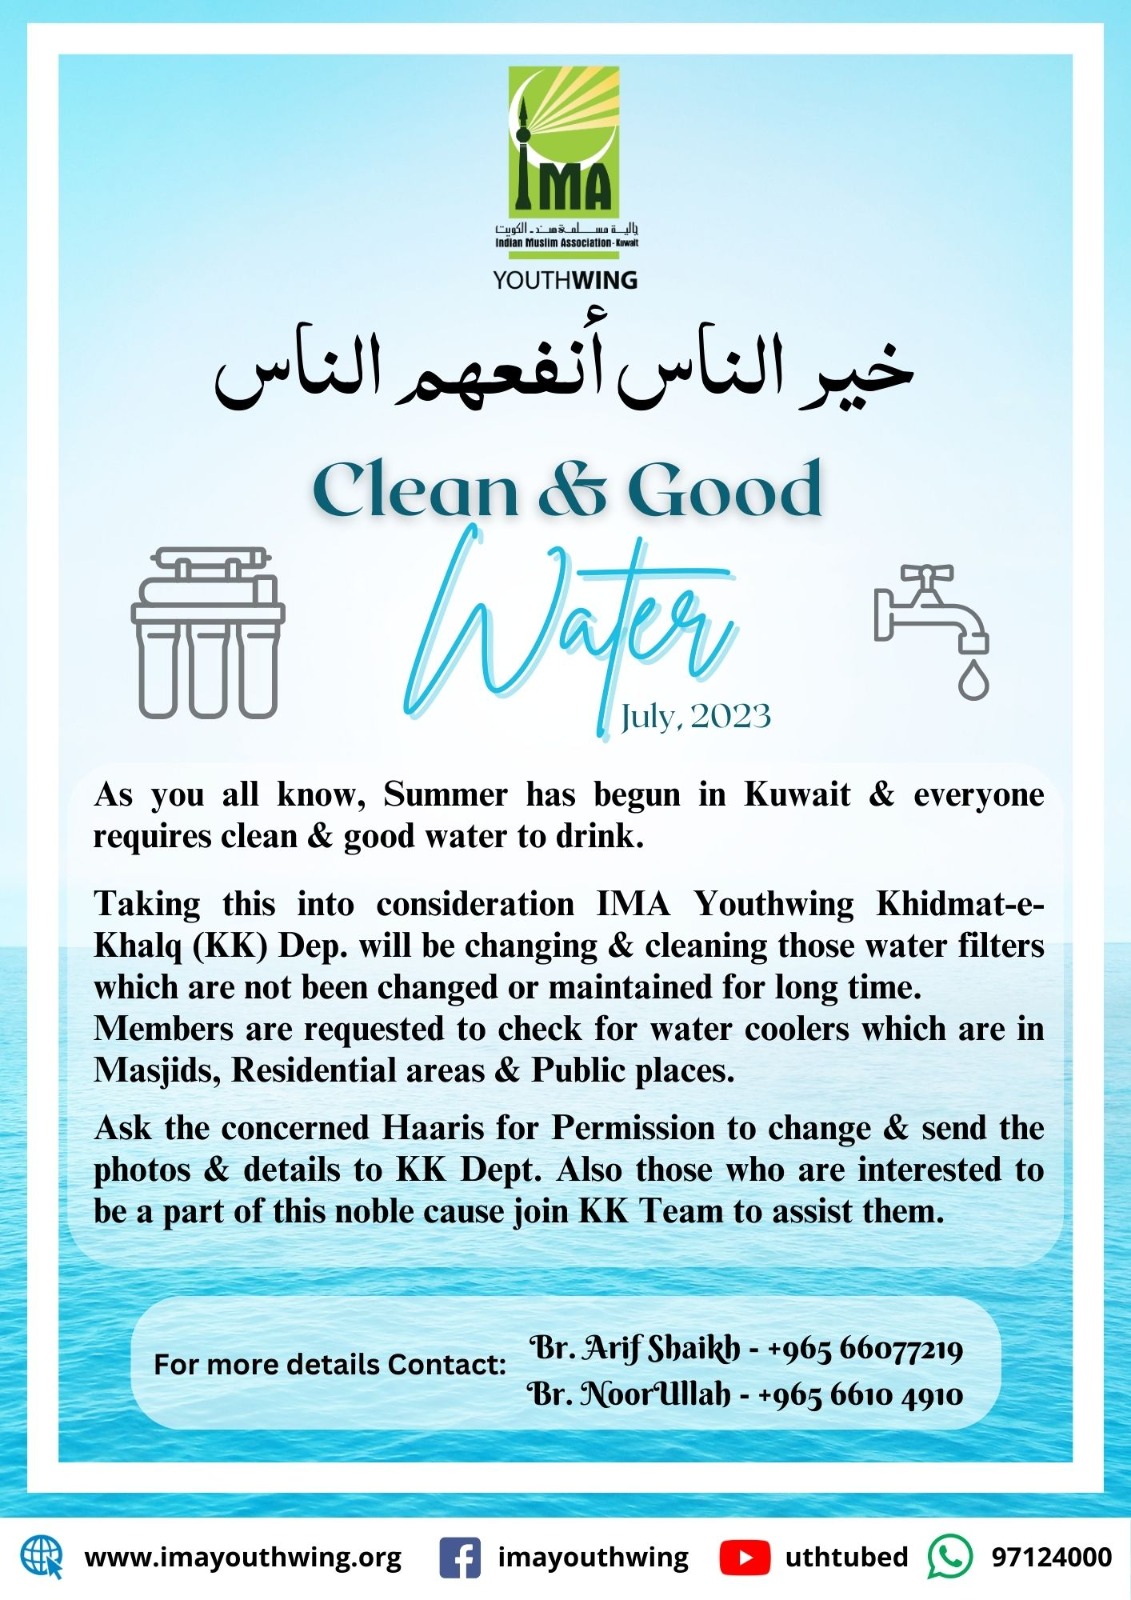 IMA YouthWing Takes Vital Task to Change and Clean Water Filters in Kuwait